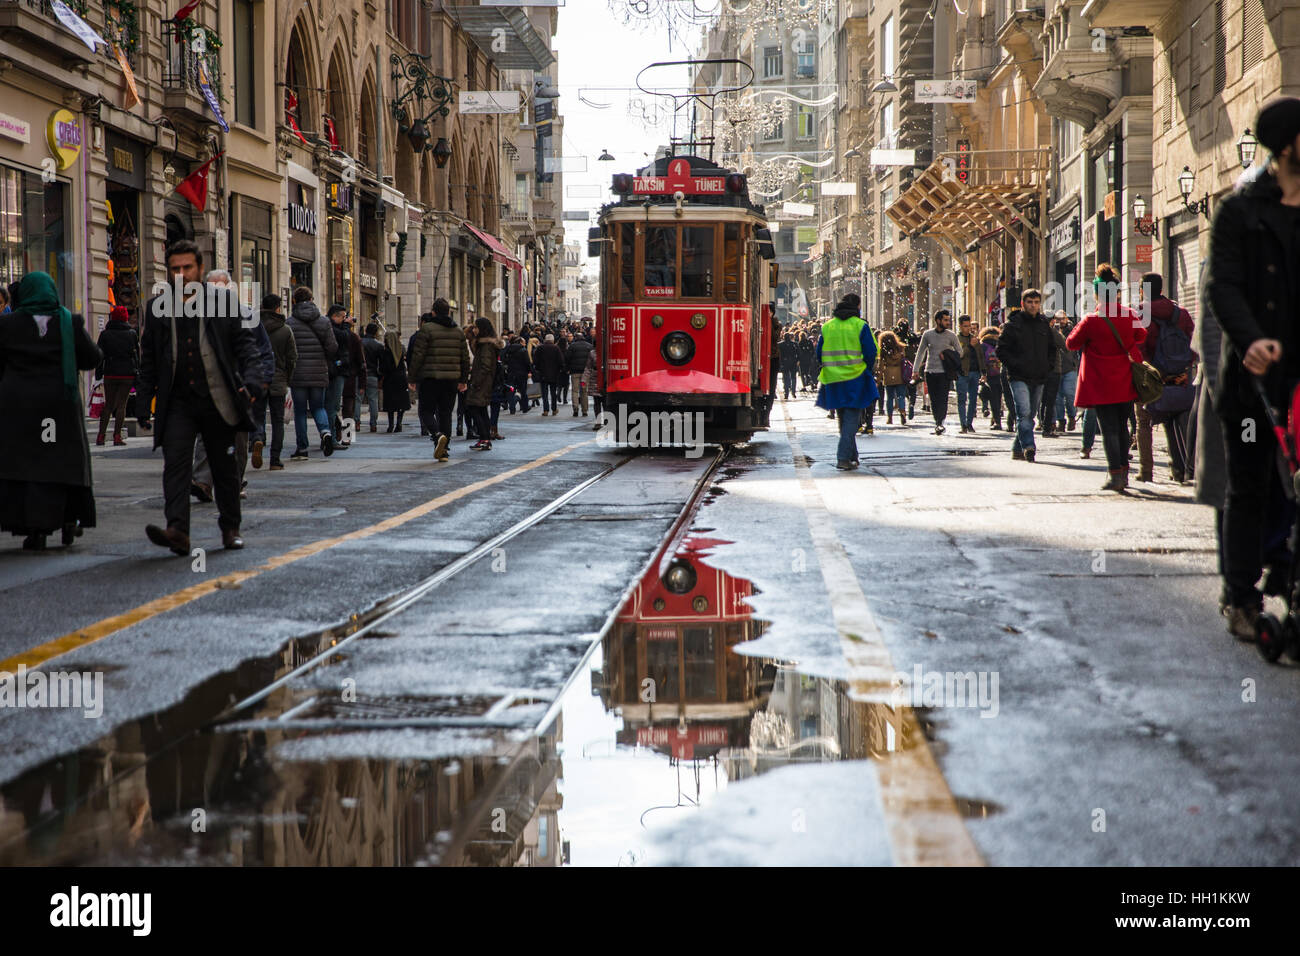 The iconic red tram on Istiklal in Istanbul, Turkey. Stock Photo